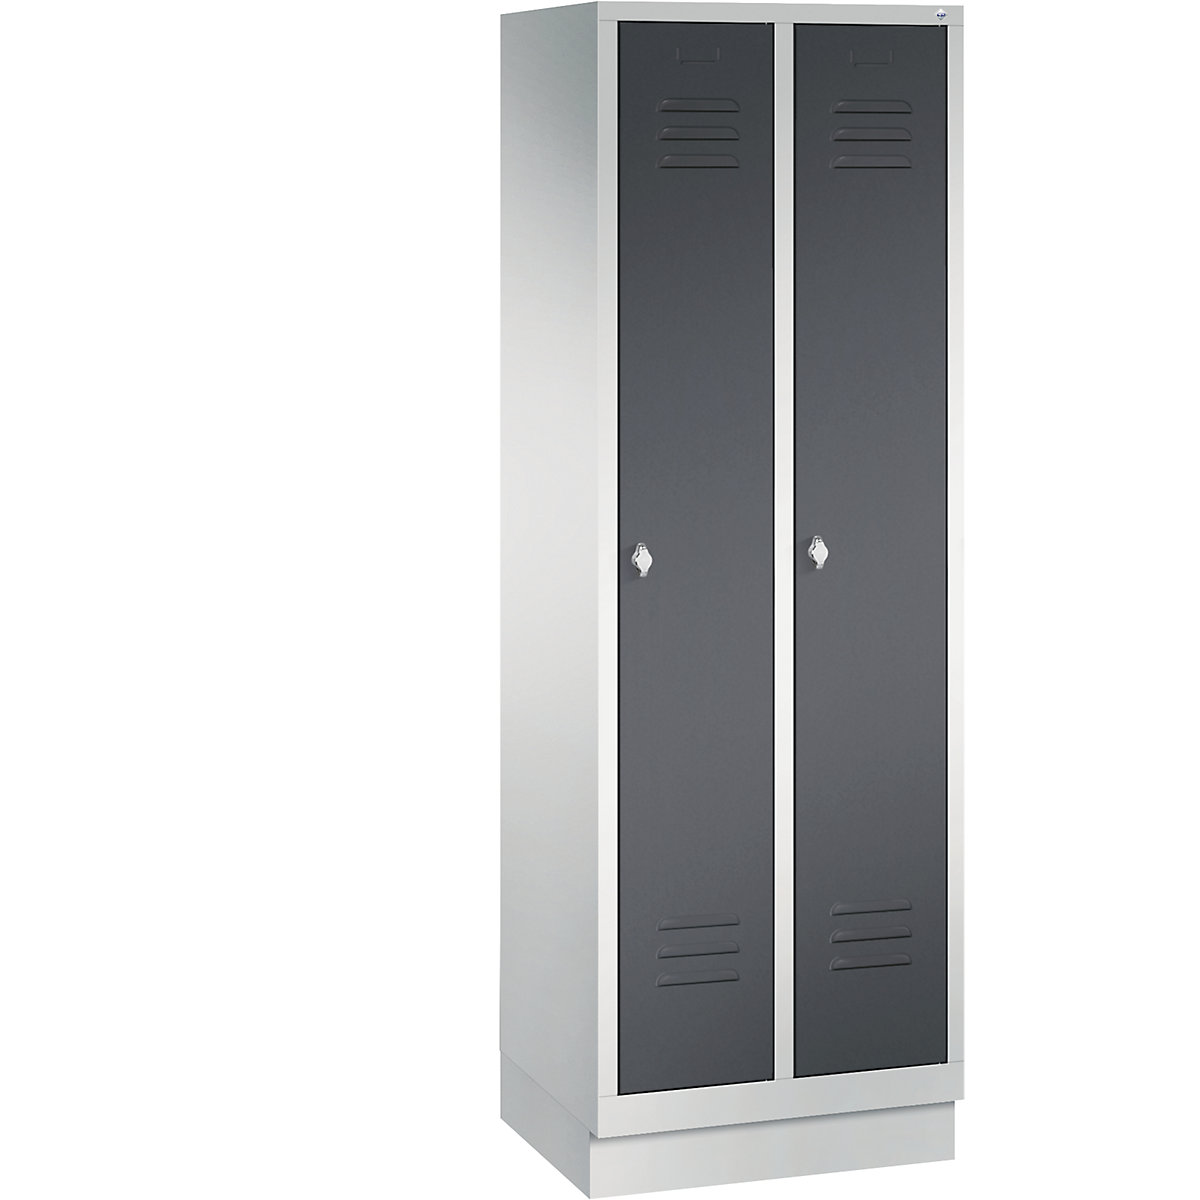 CLASSIC storage cupboard with plinth – C+P, 2 compartments, compartment width 300 mm, light grey / black grey-14